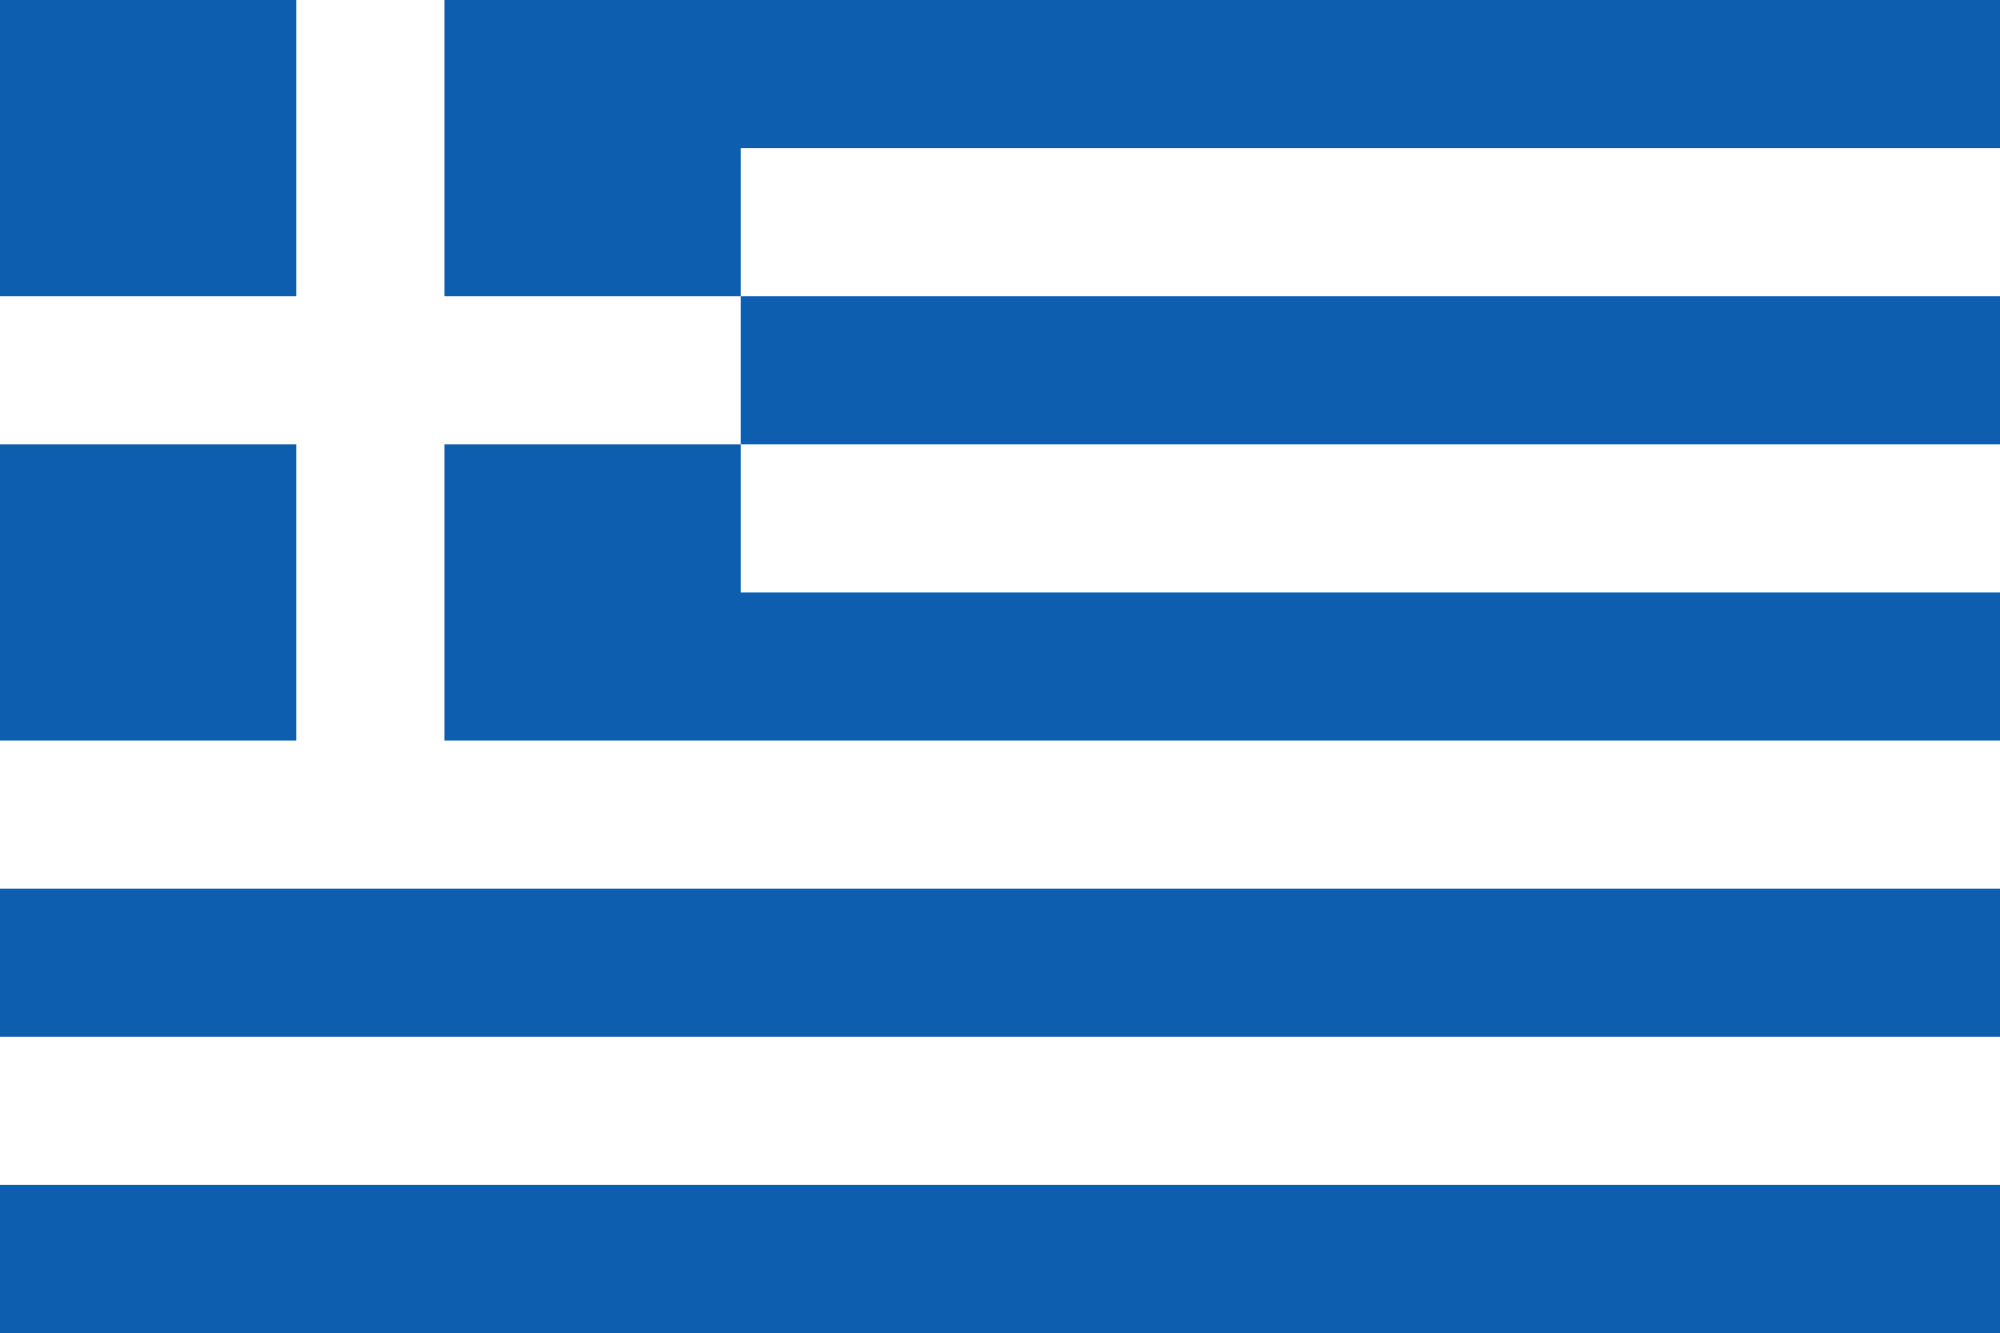 EGBA submits response to Greek gambling law changes